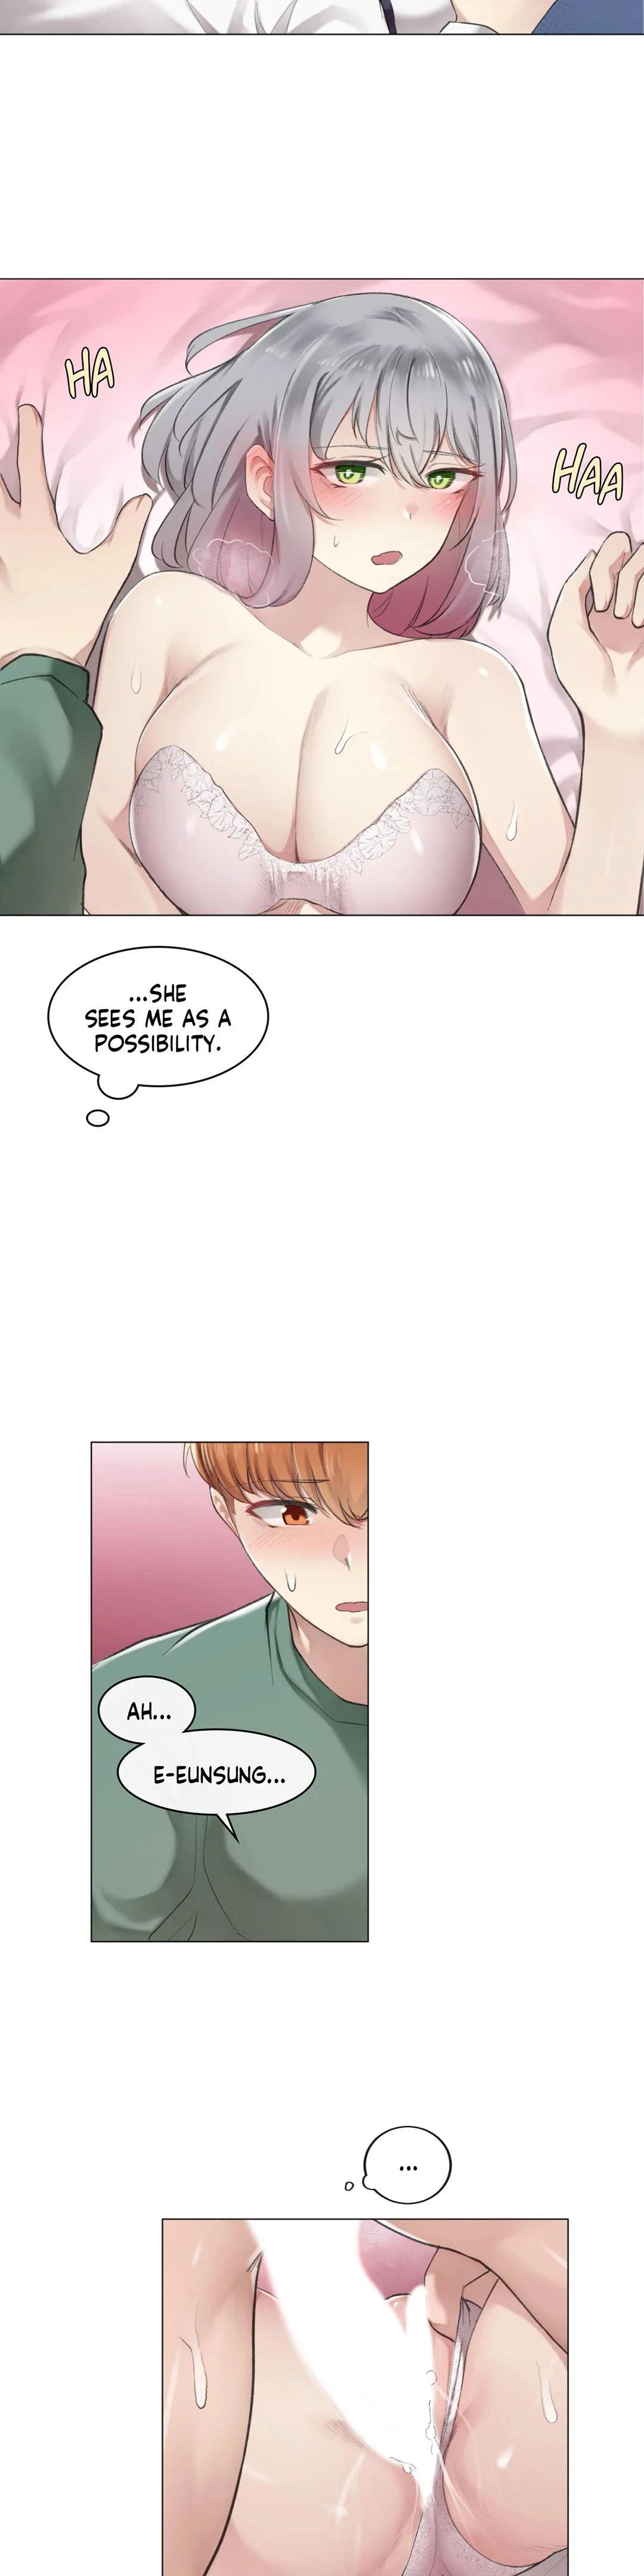 [Dumangoon, KONG_] Sexcape Room: Snap Off Ch.7/7 [English] [Manhwa PDF] Completed 99